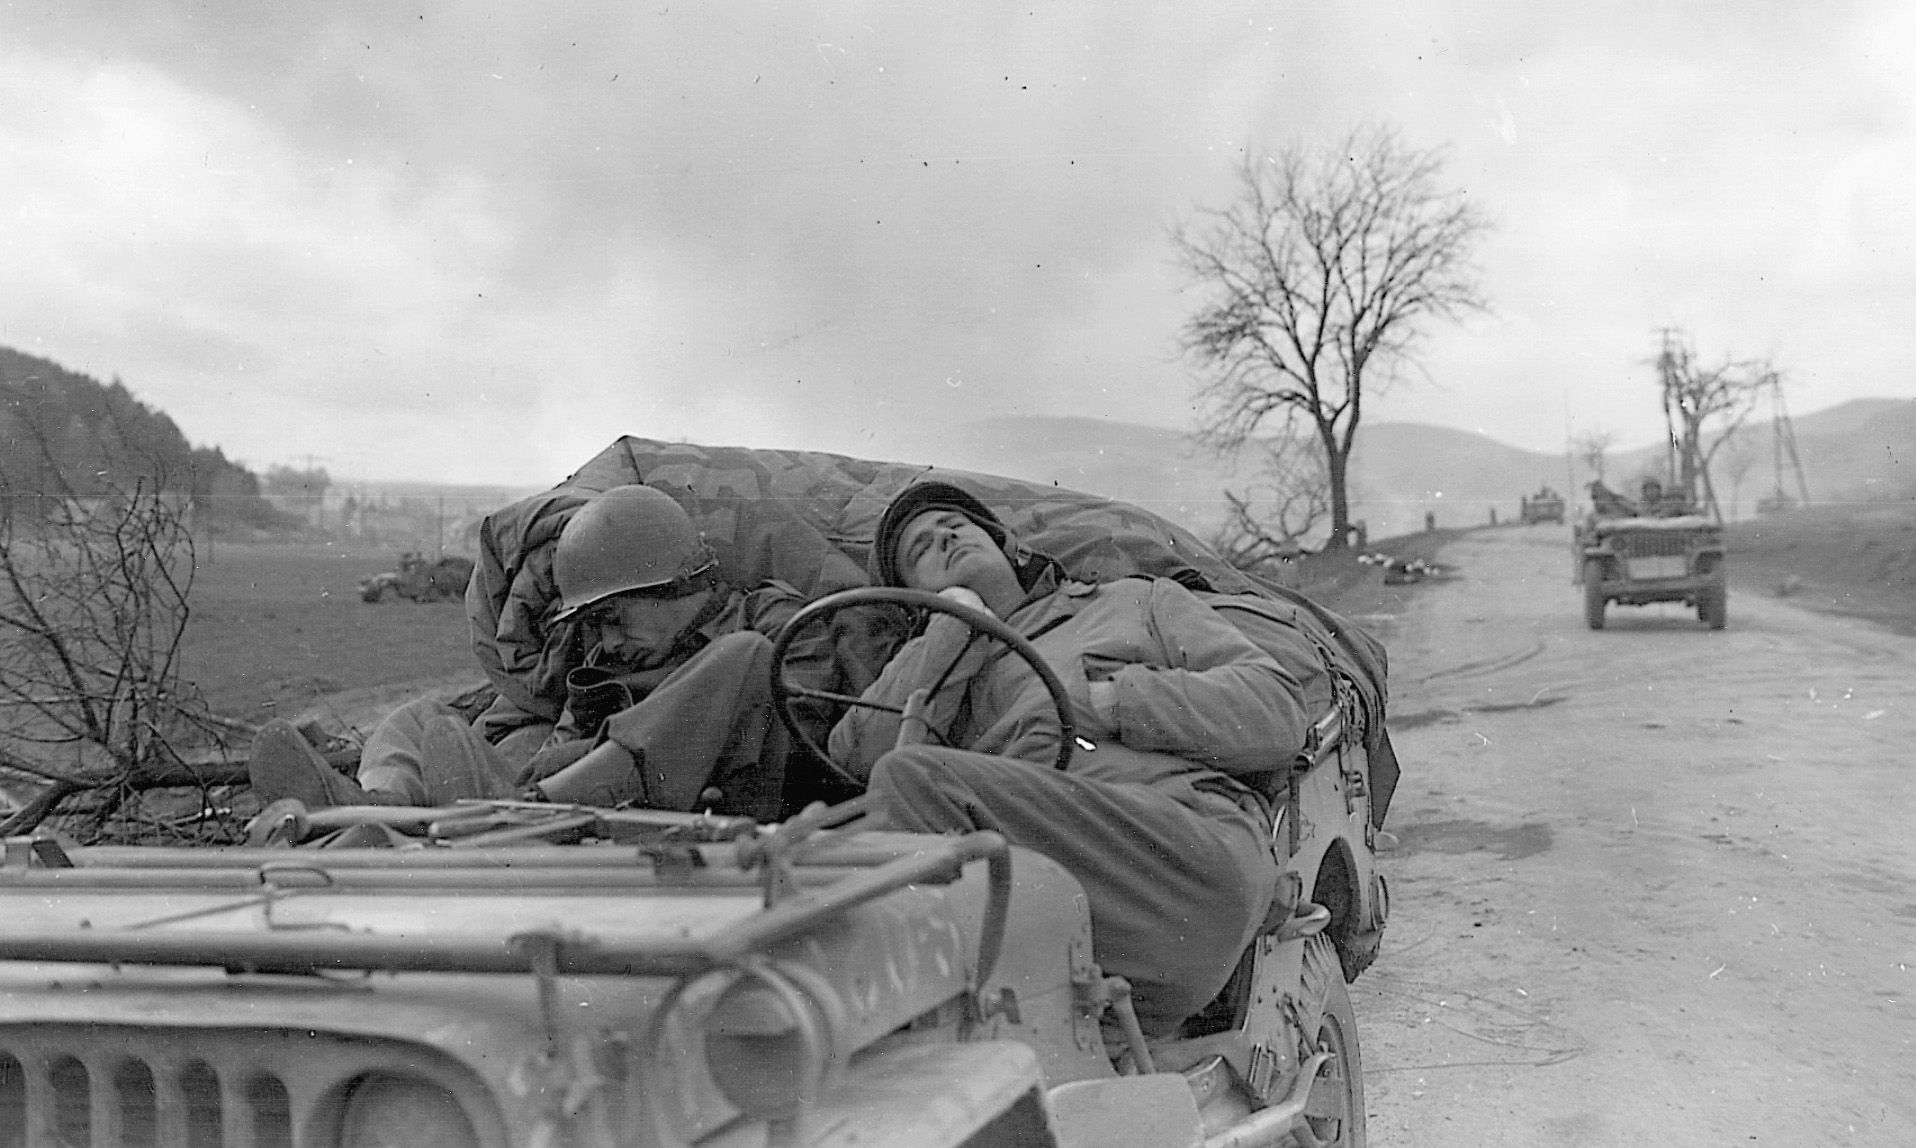 Soldiers with the 6th Armored Division catch a few winks on the outskirts of the burning town of Waldkappel, Germany.